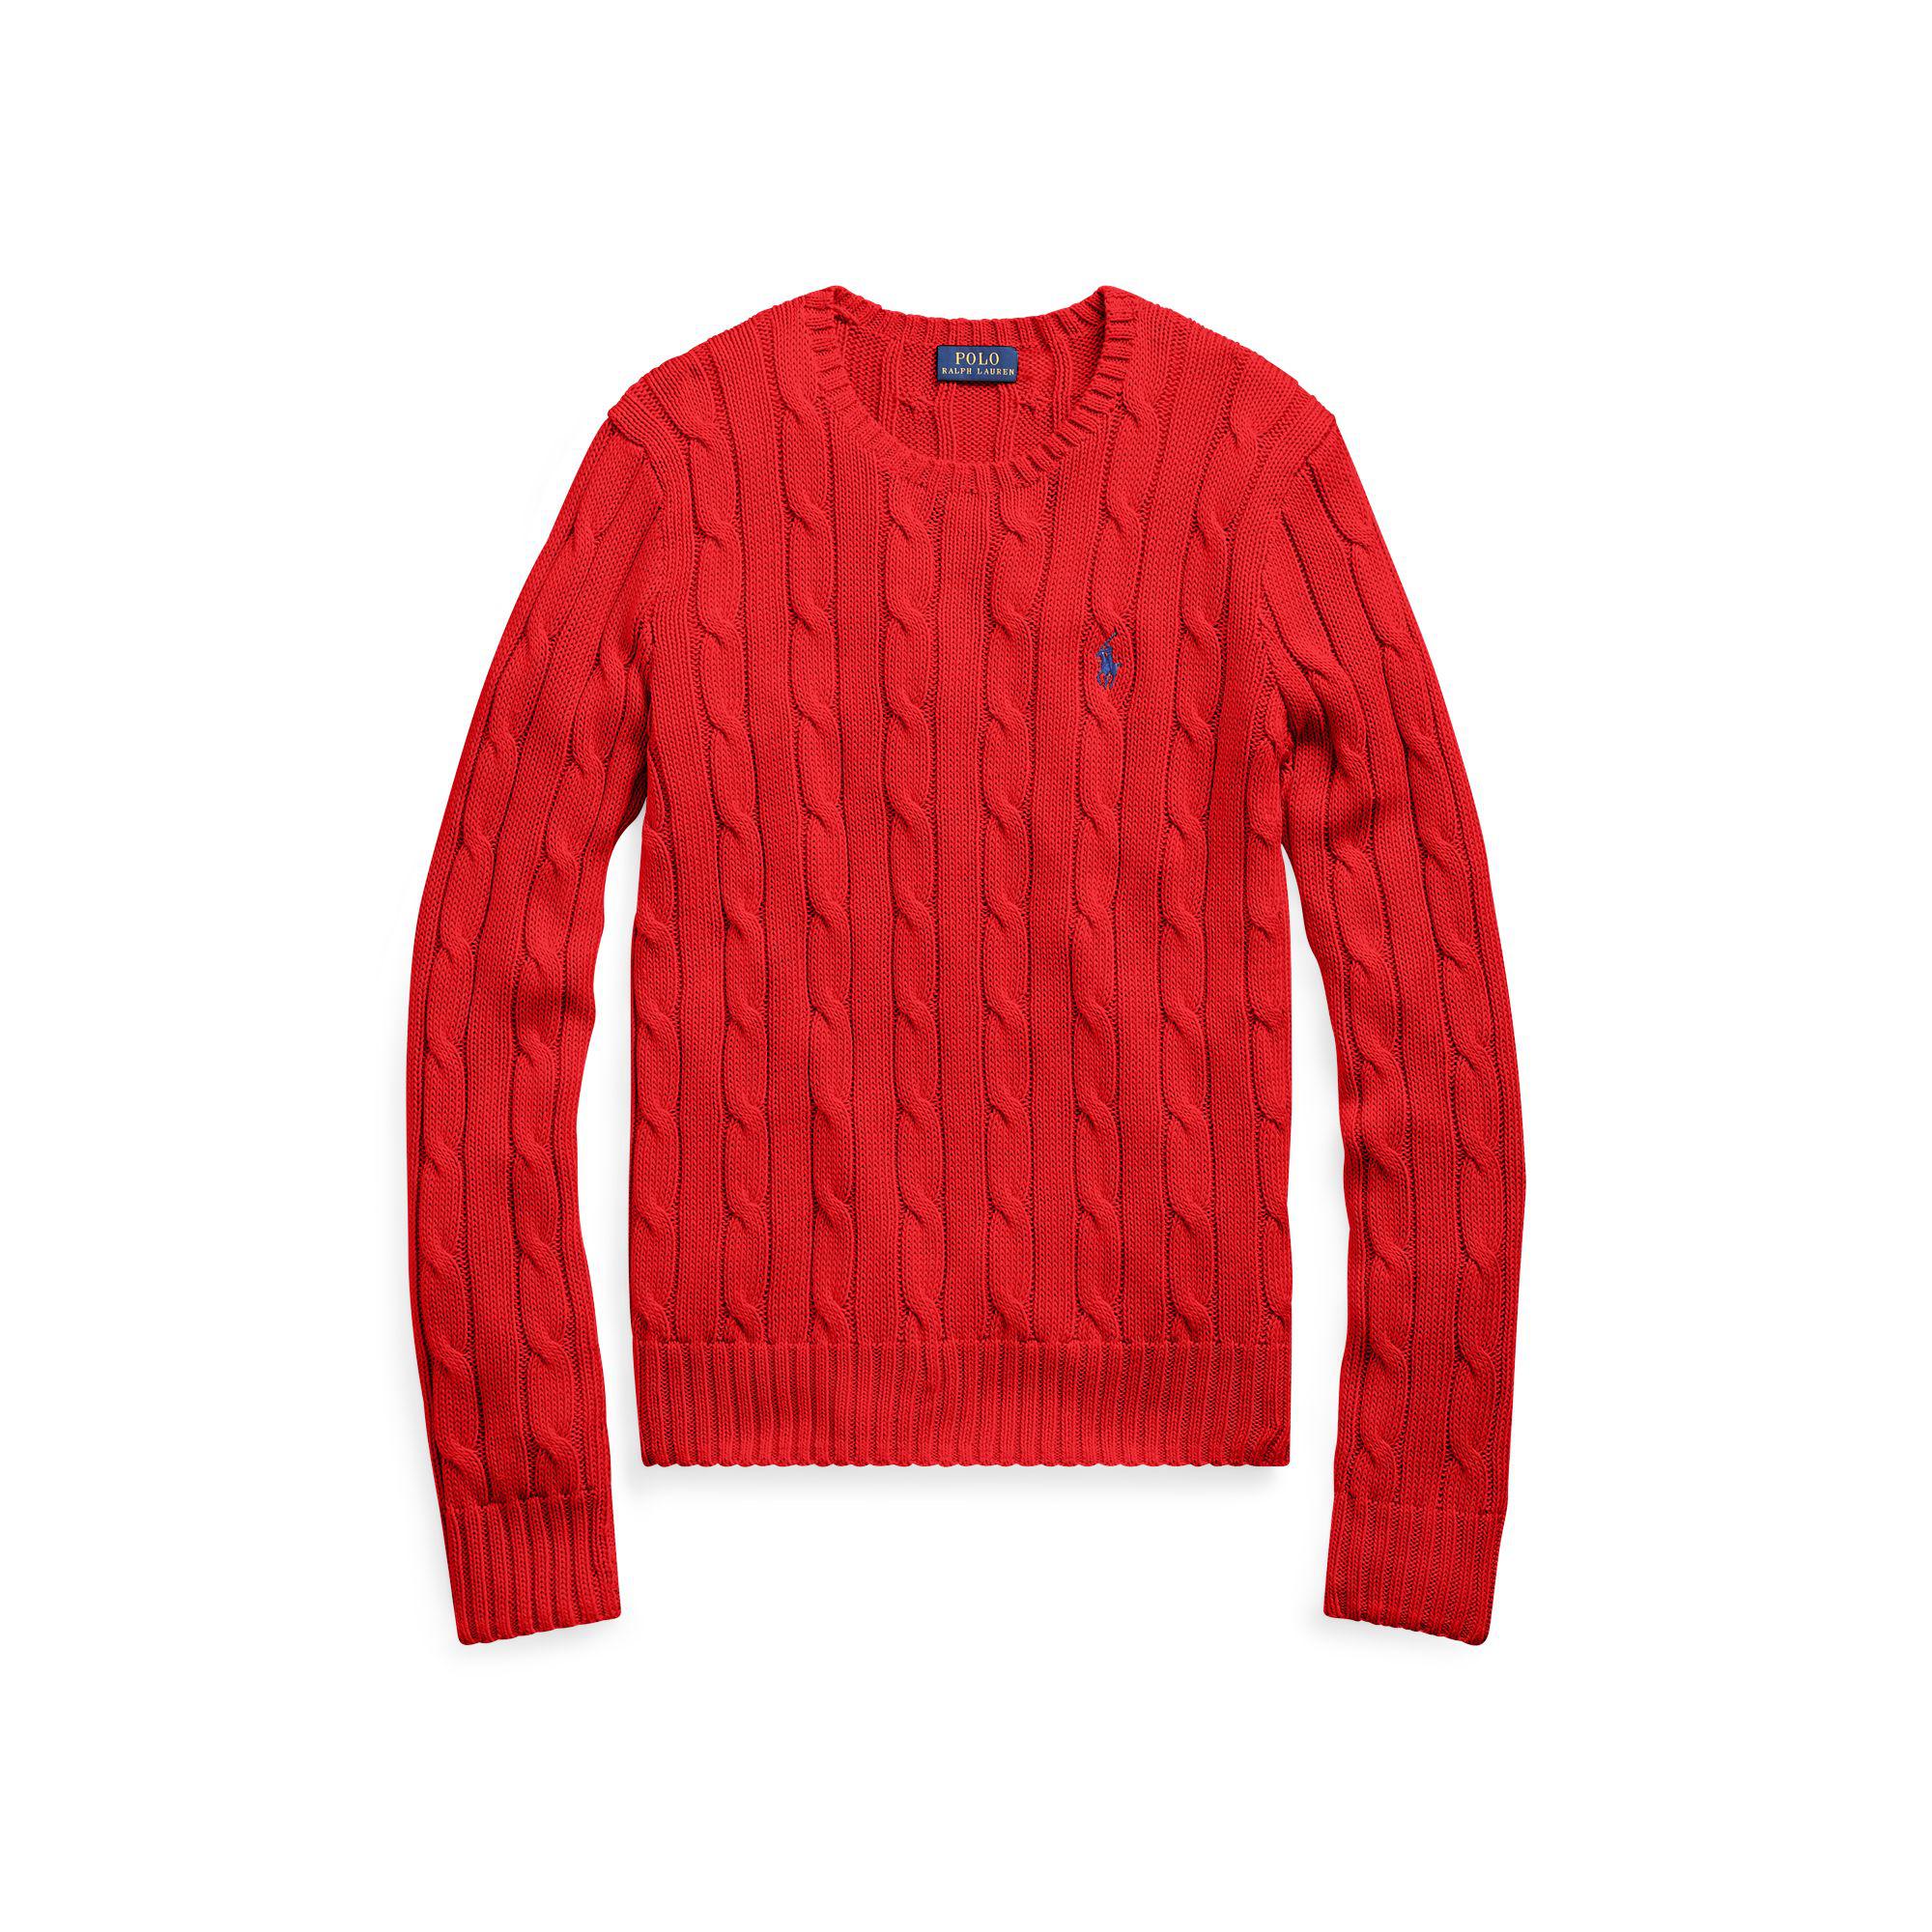 Polo Ralph Lauren Cable-knit Cotton Sweater in Bright Red (Red 